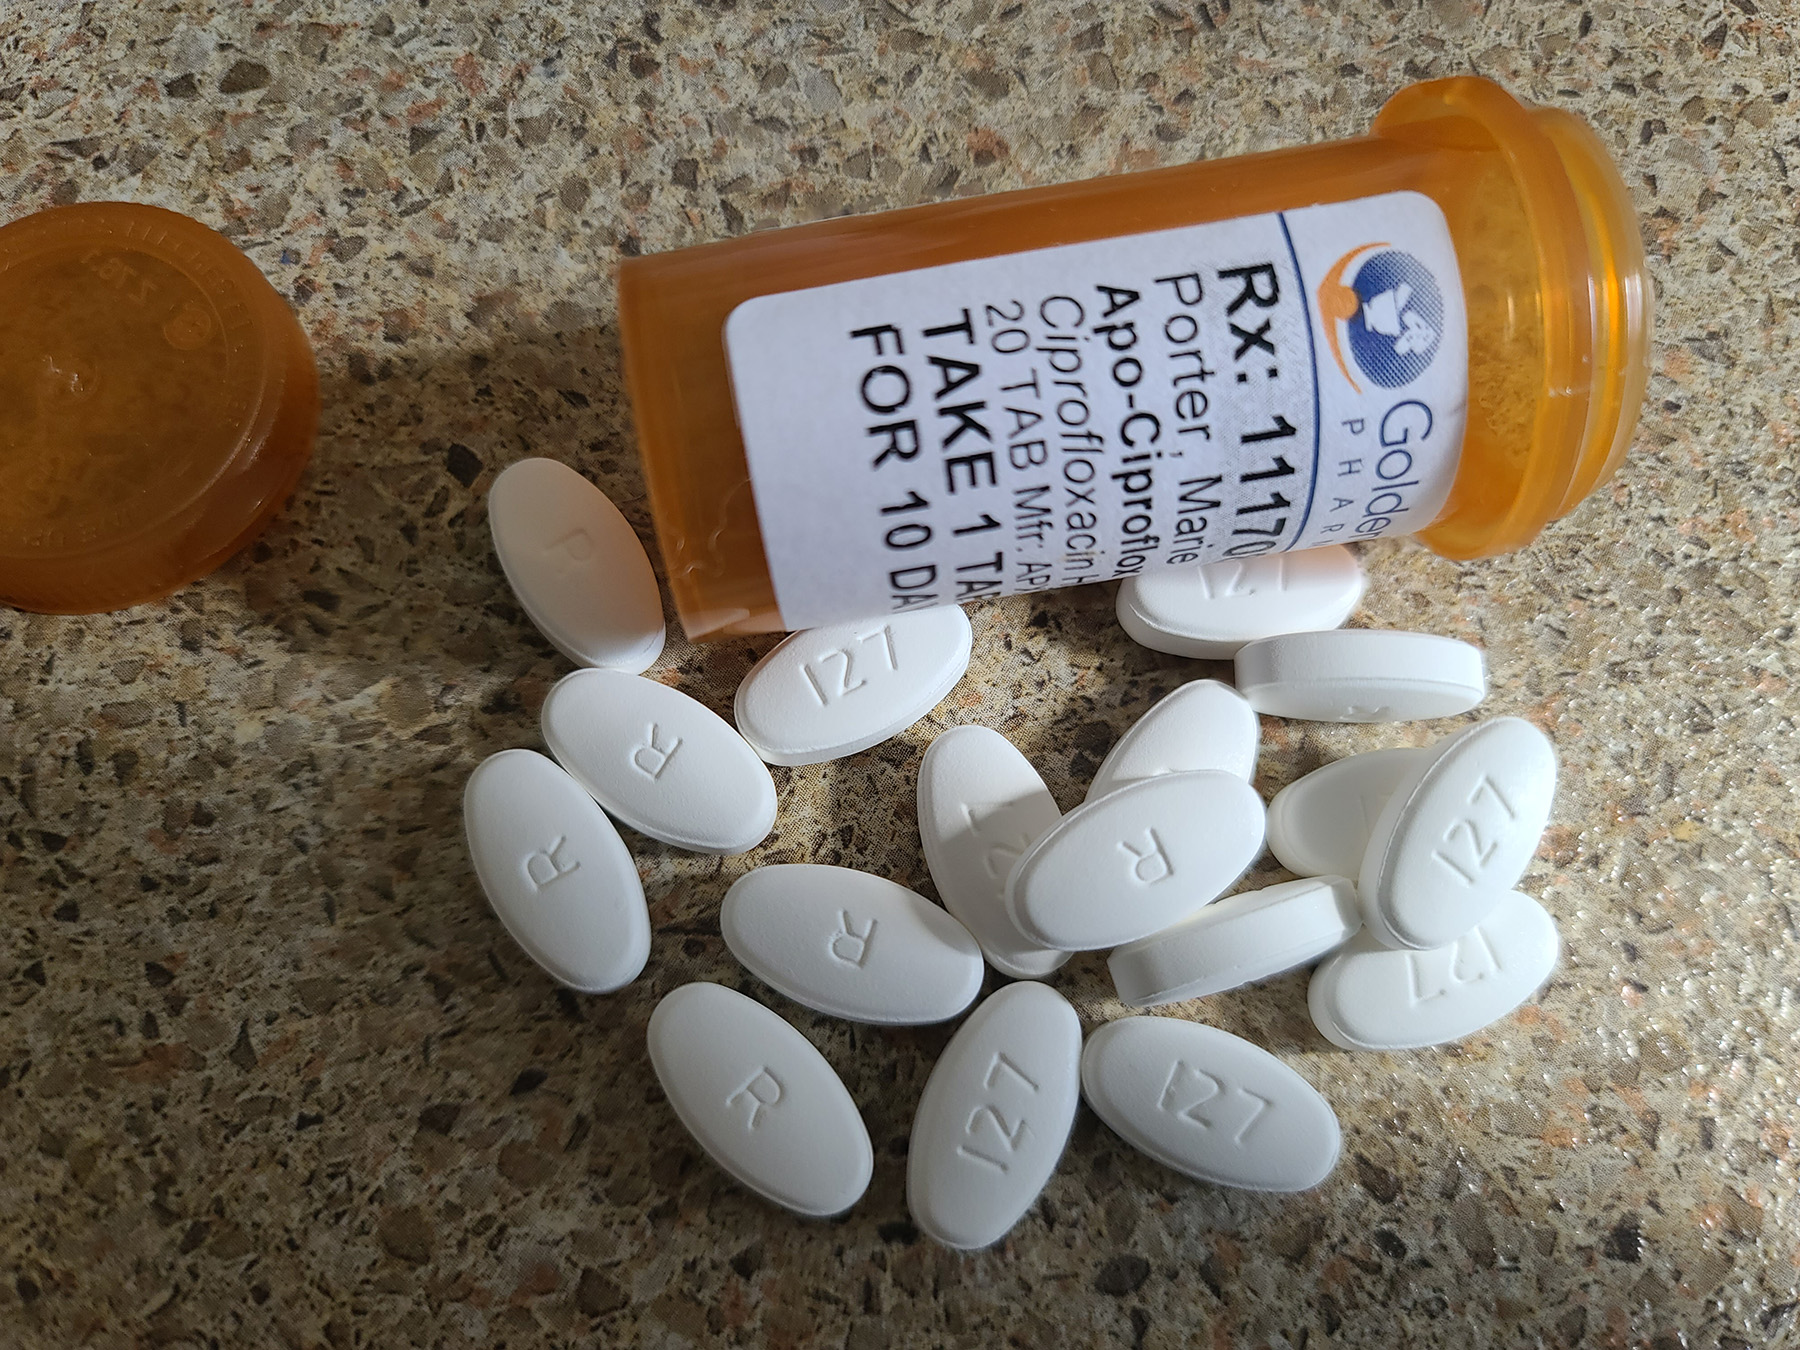 A bottle of ciprofloxacin with the pills spread out in front of it.